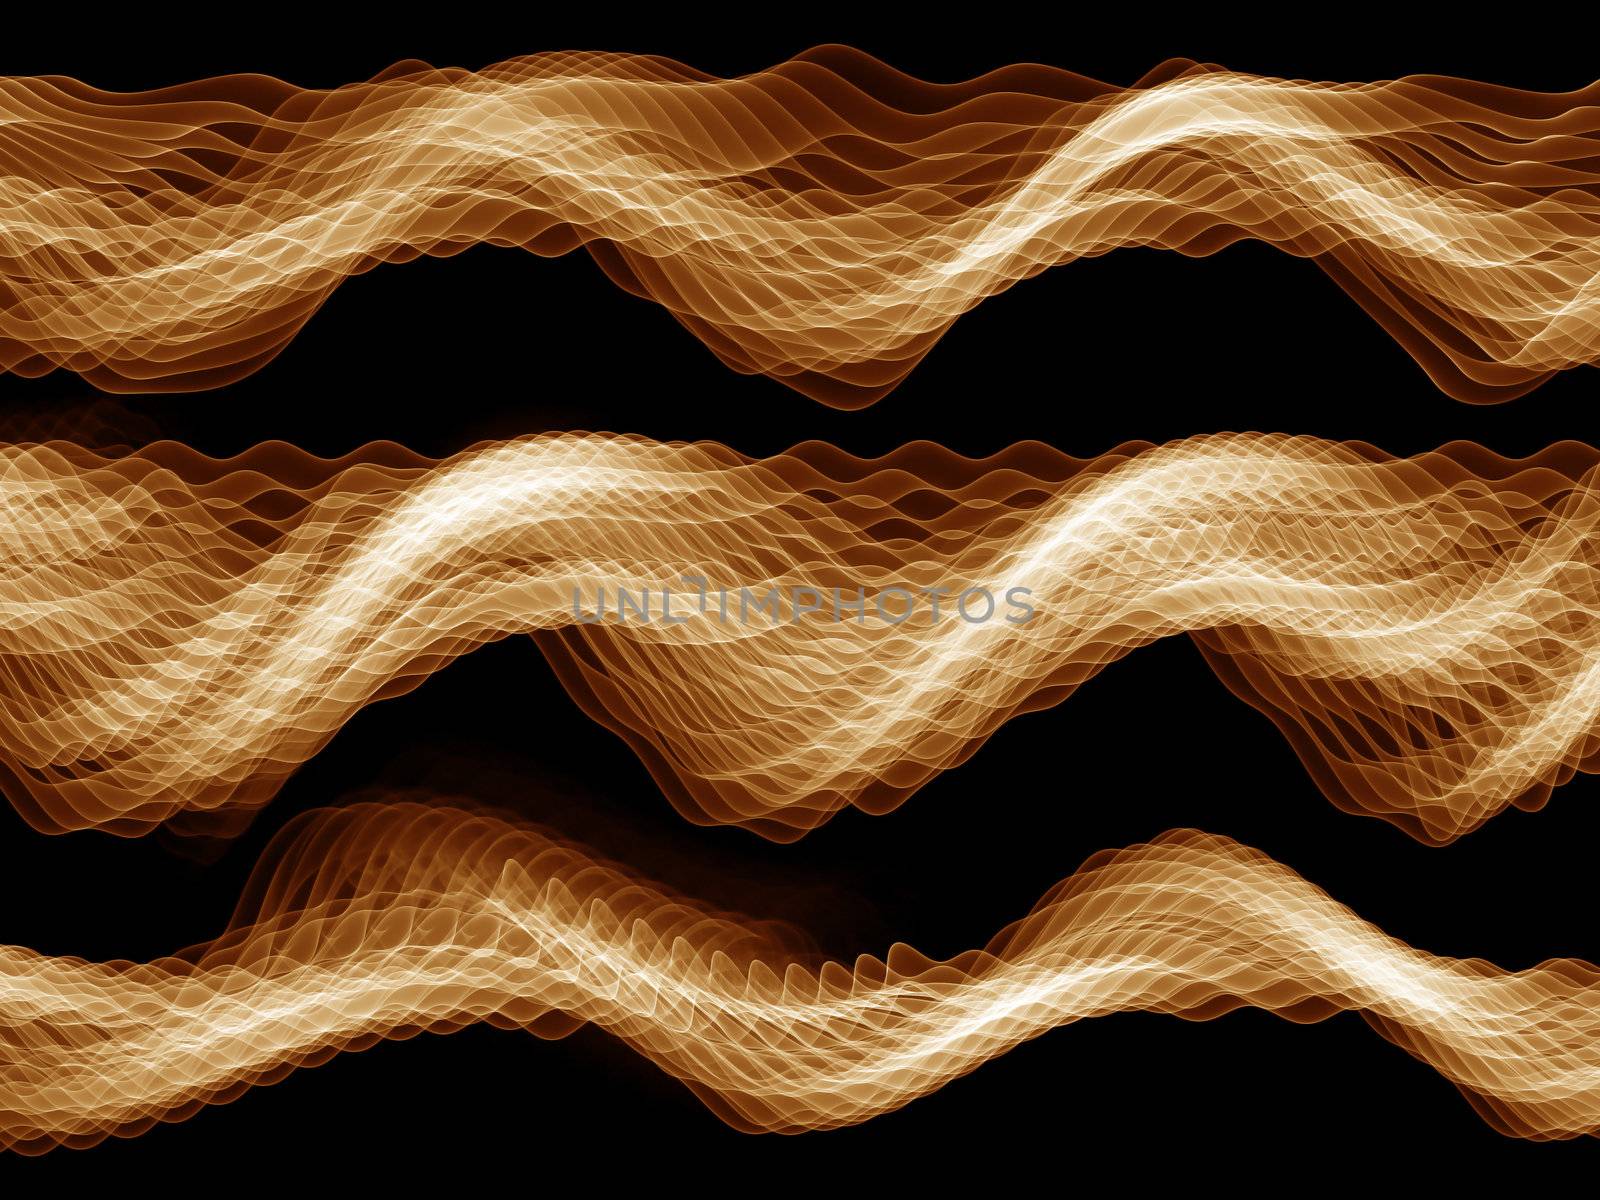 Abstract sine waves rendered in yellow against black background